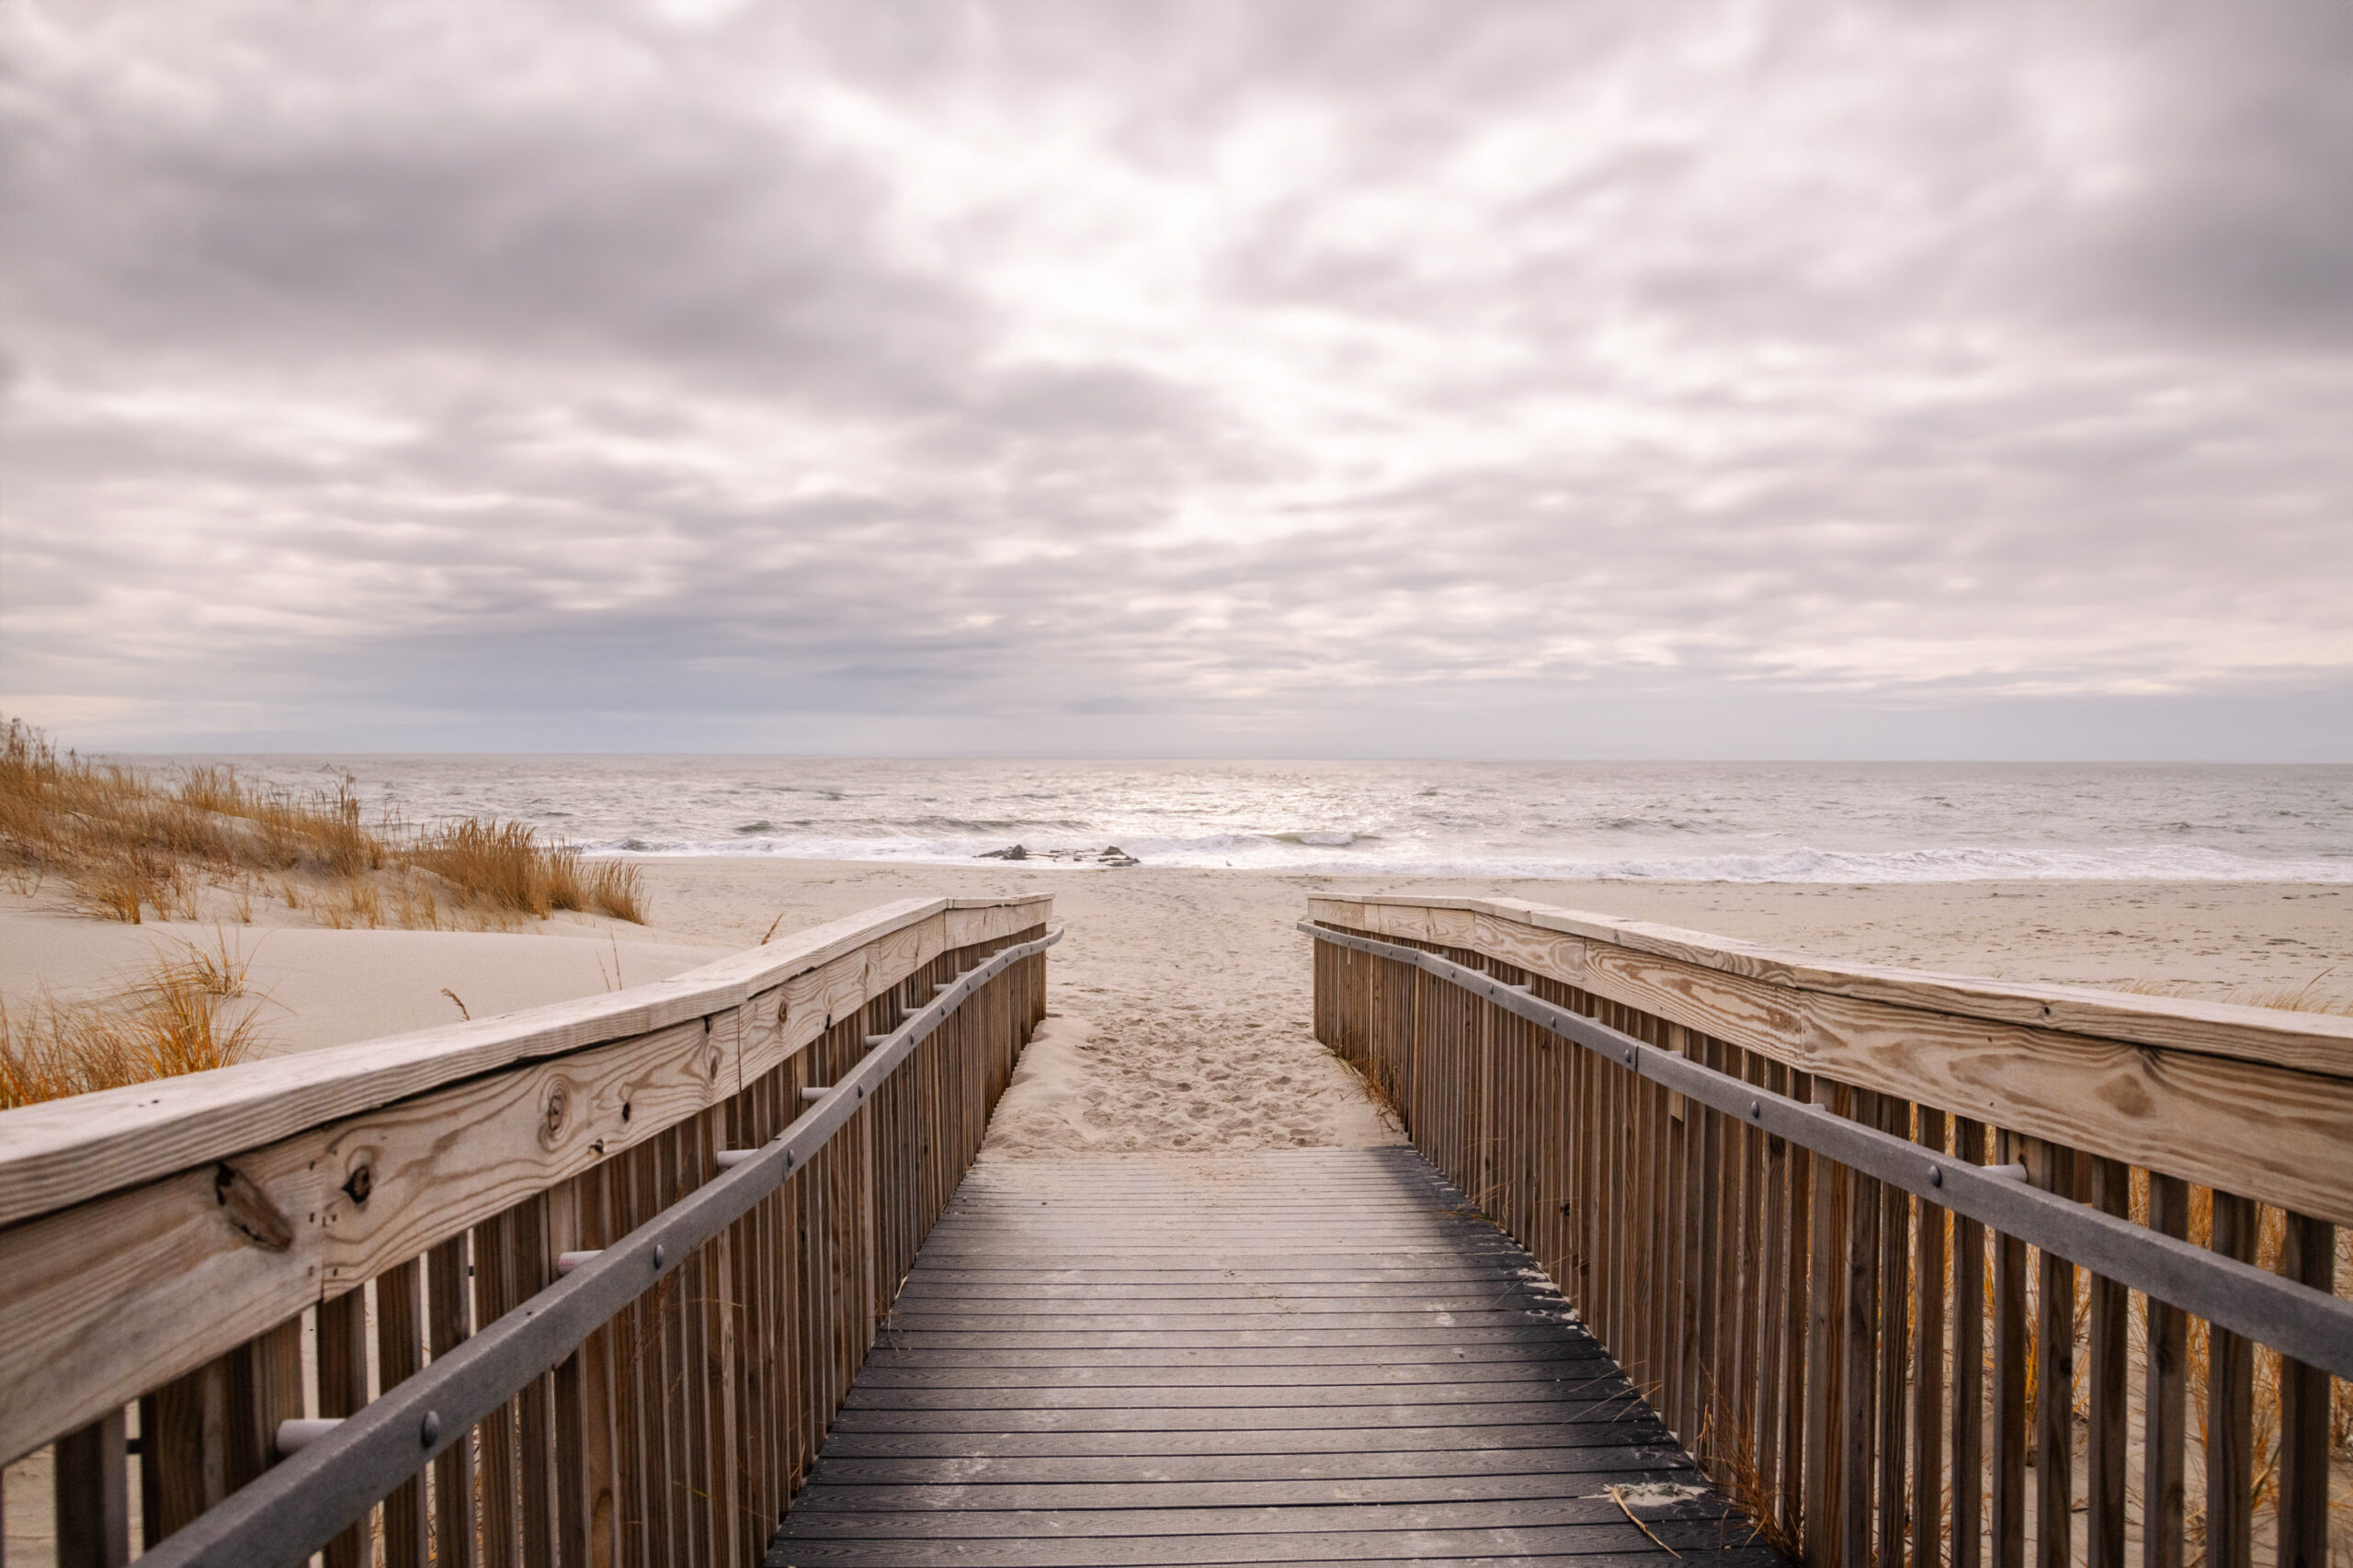 A wooden path leading to the beach with a cloudy sky and hints of sunlight reflected on the ocean